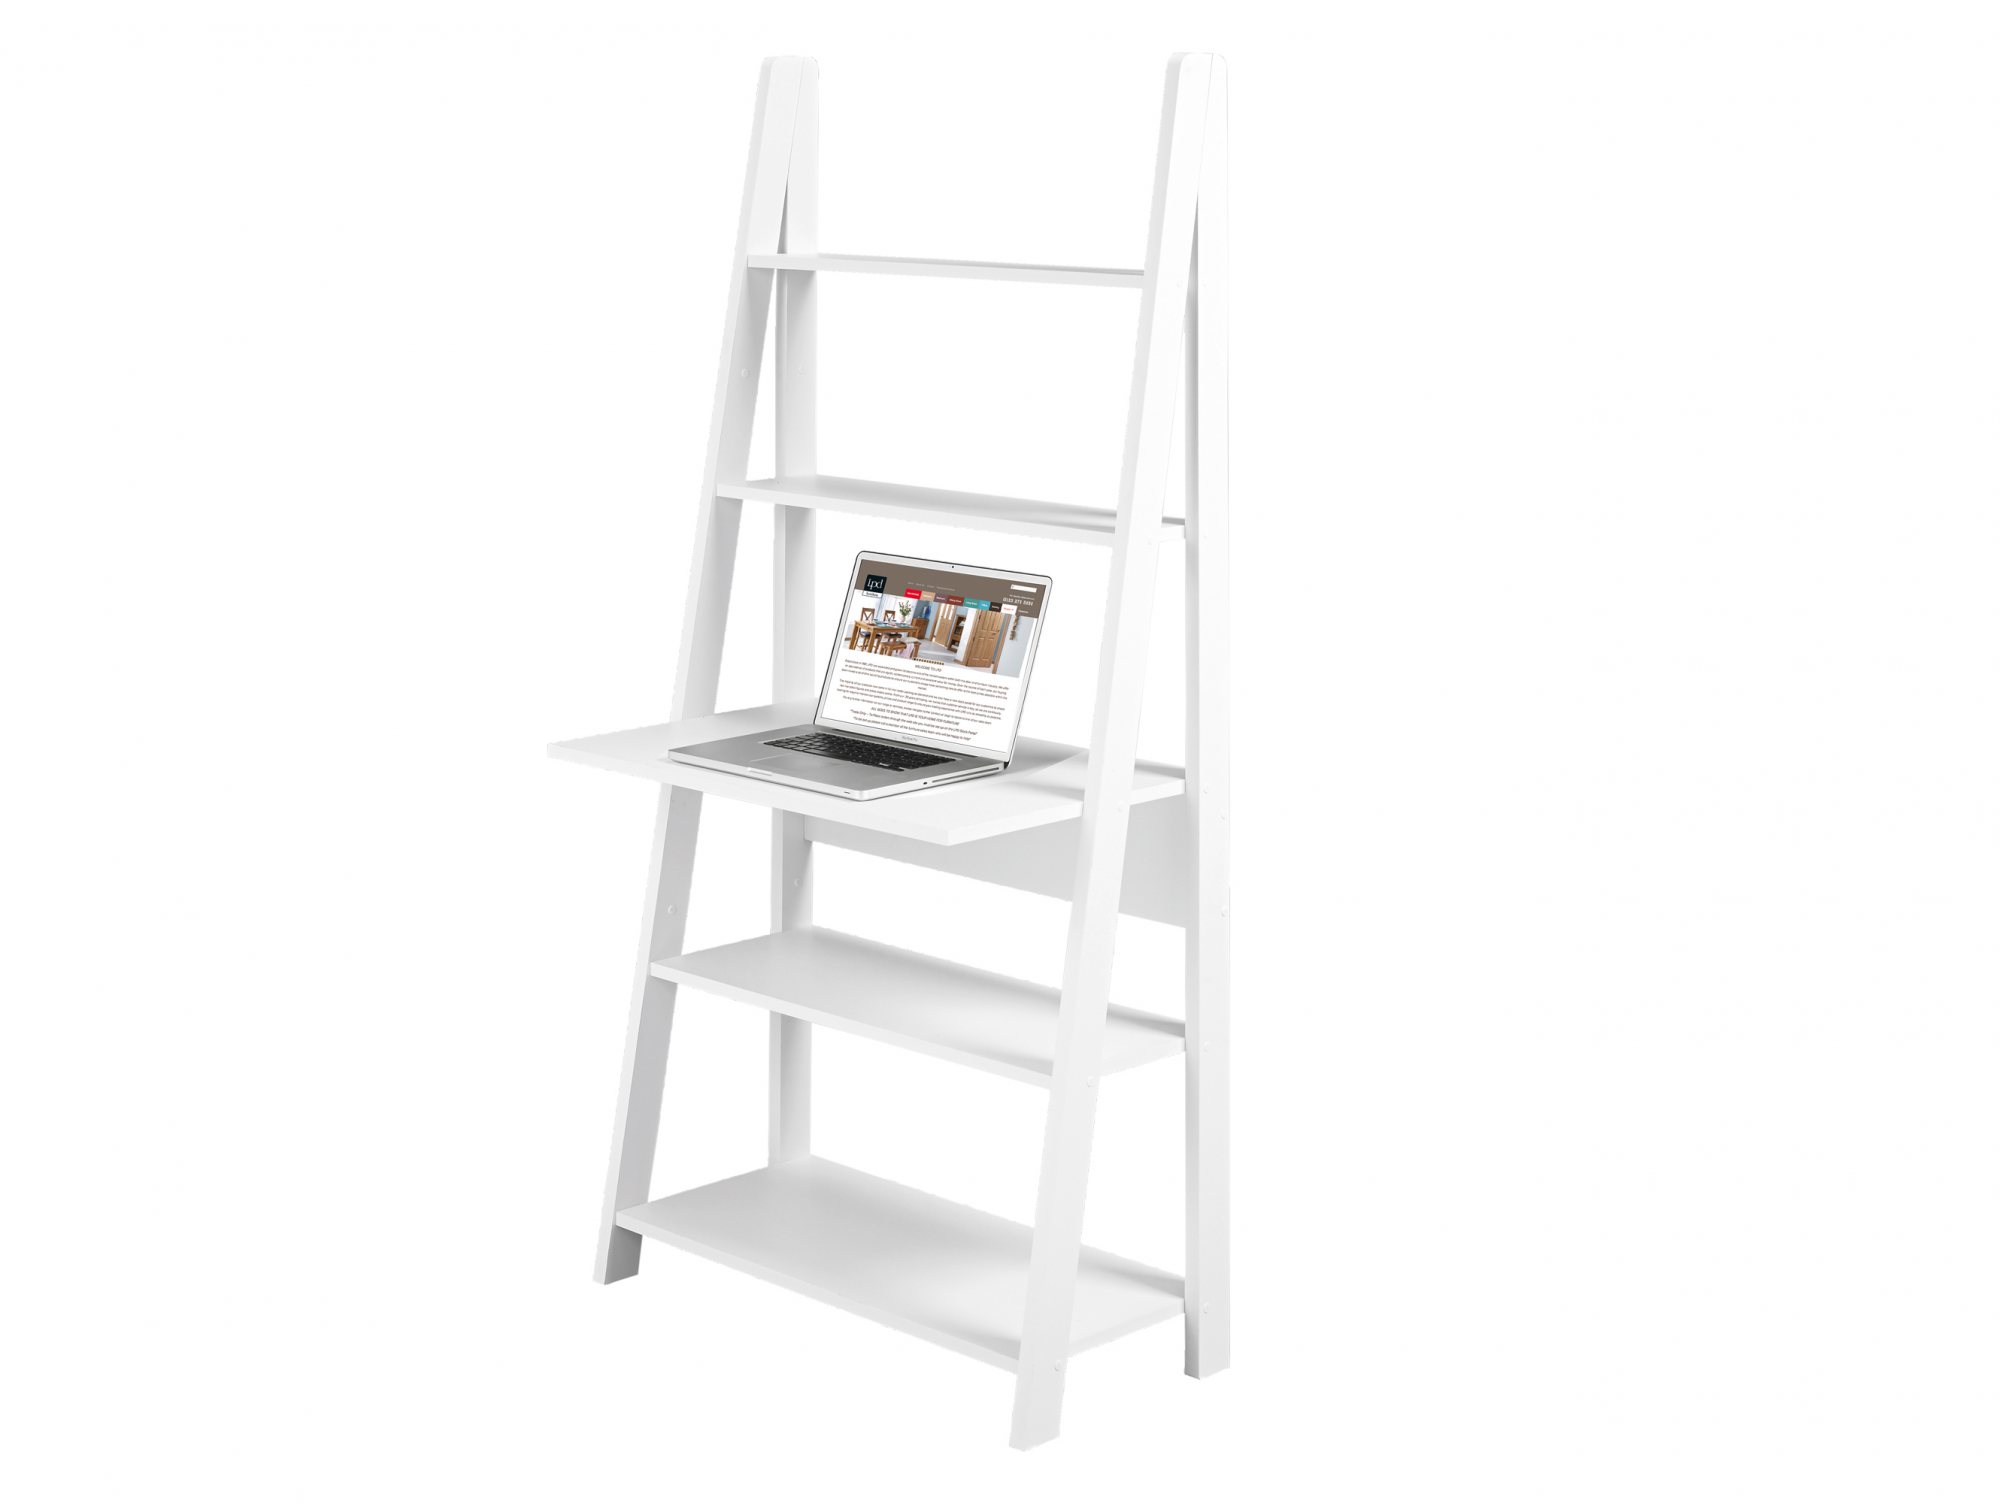 LPD LPD Tiva White Ladder Shelving Unit with Desk (Flat Packed)